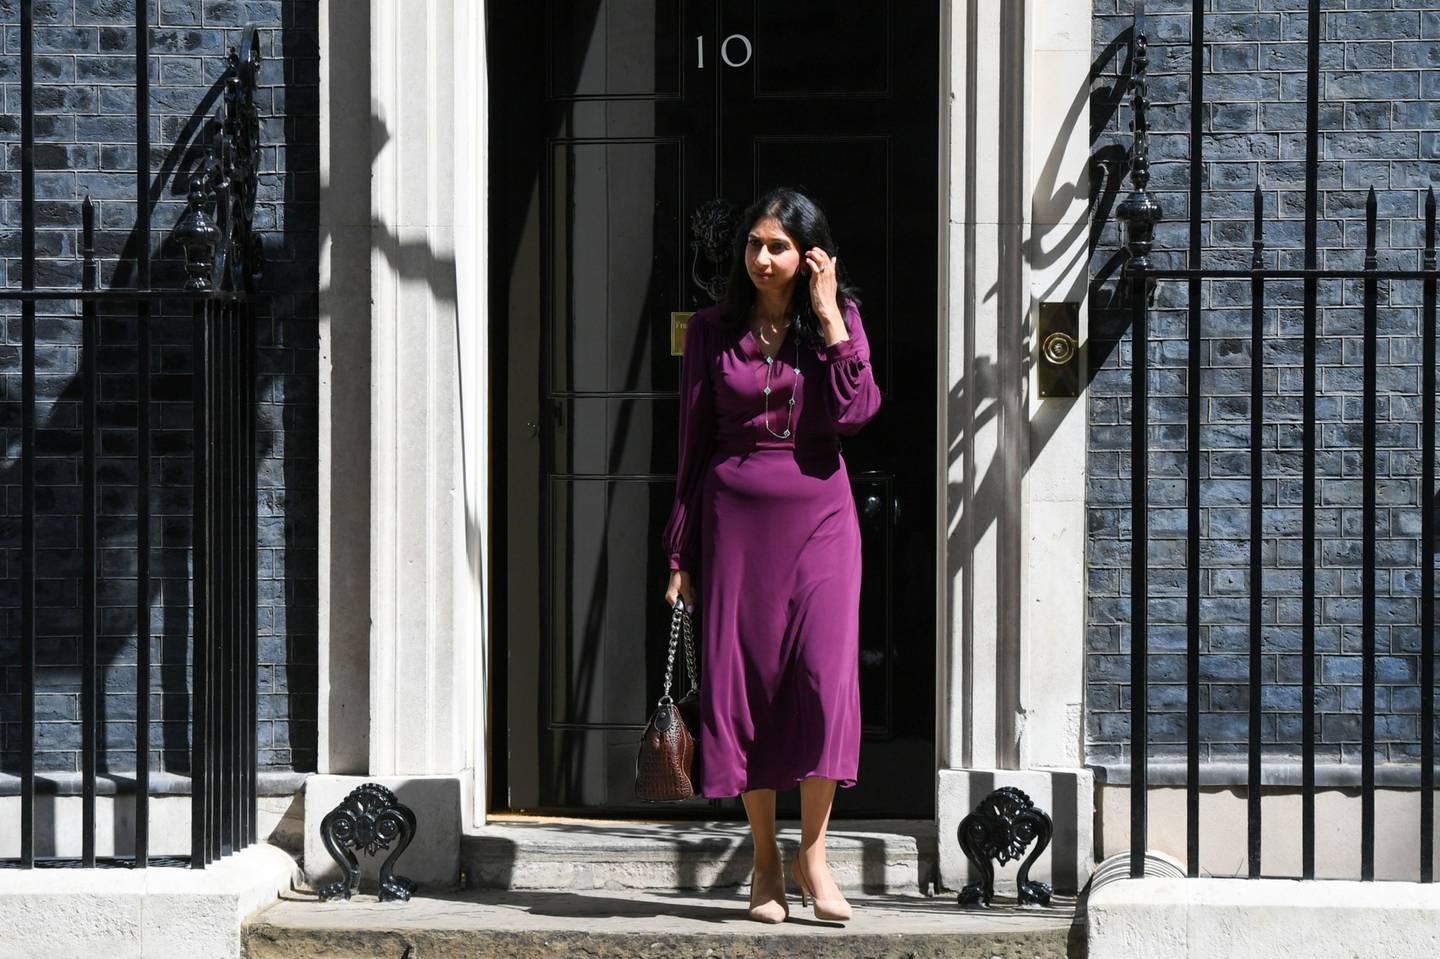 UK Attorney General Suella Braverman after a weekly meeting of Cabinet ministers at 10 Downing Street in London on July 5, 2022. Bloomberg